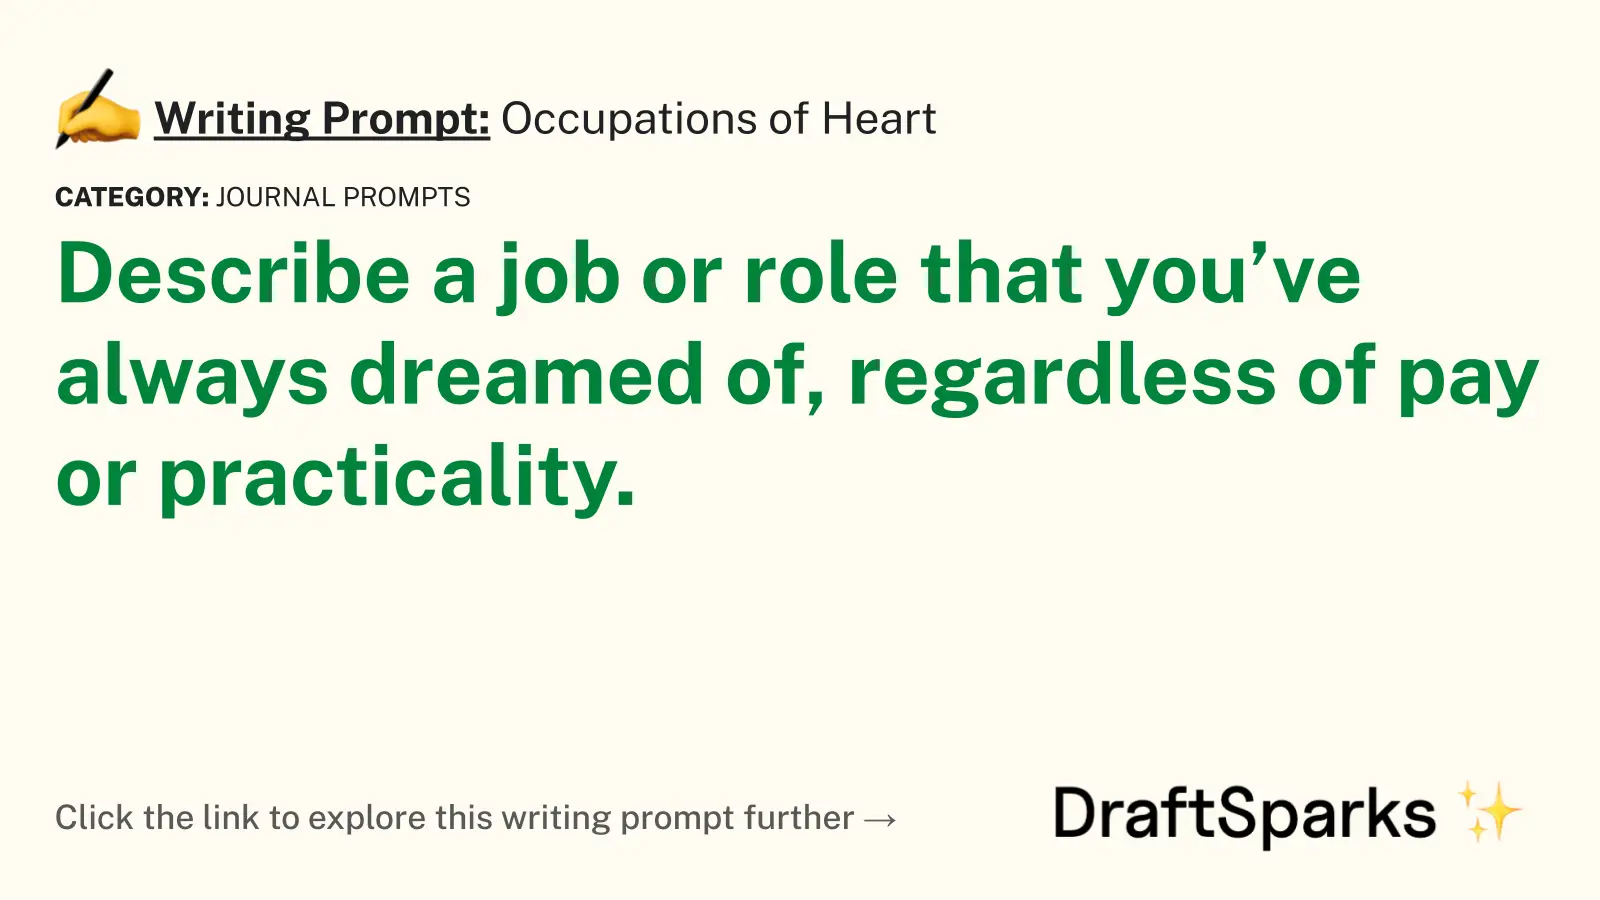 Occupations of Heart